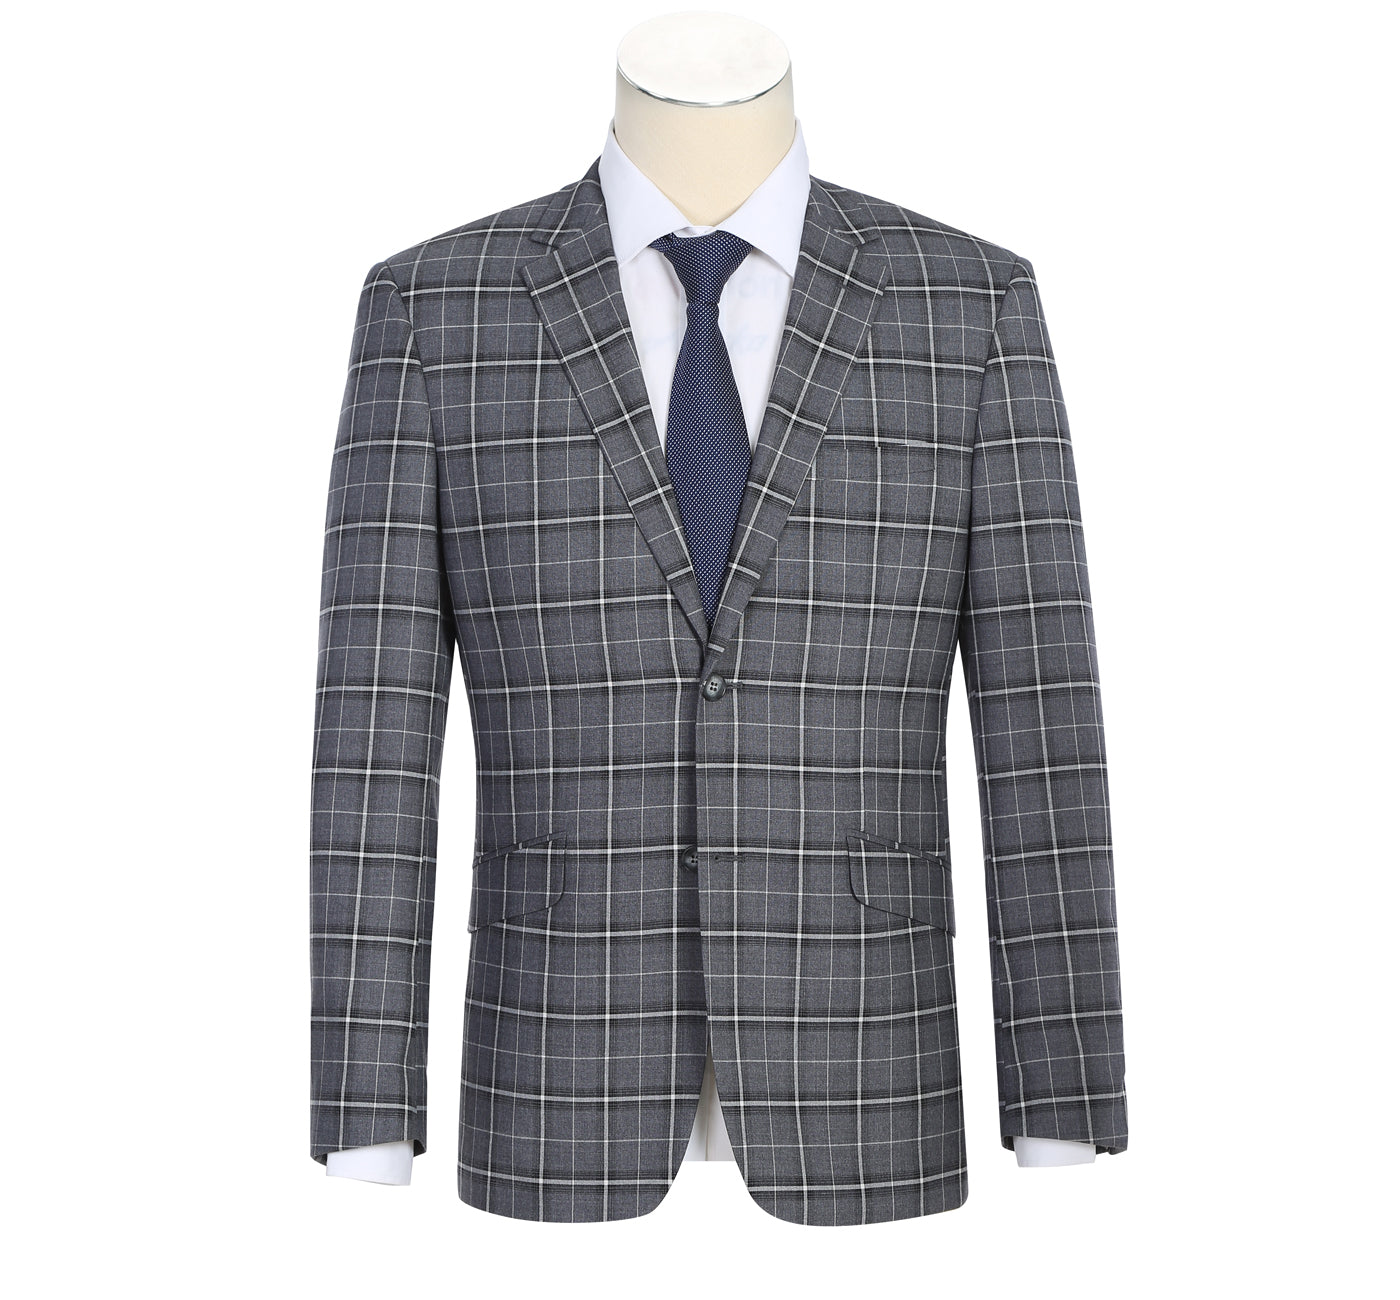 293-14 Men's Classic Fit Single-Breasted Grey & White Check Suit